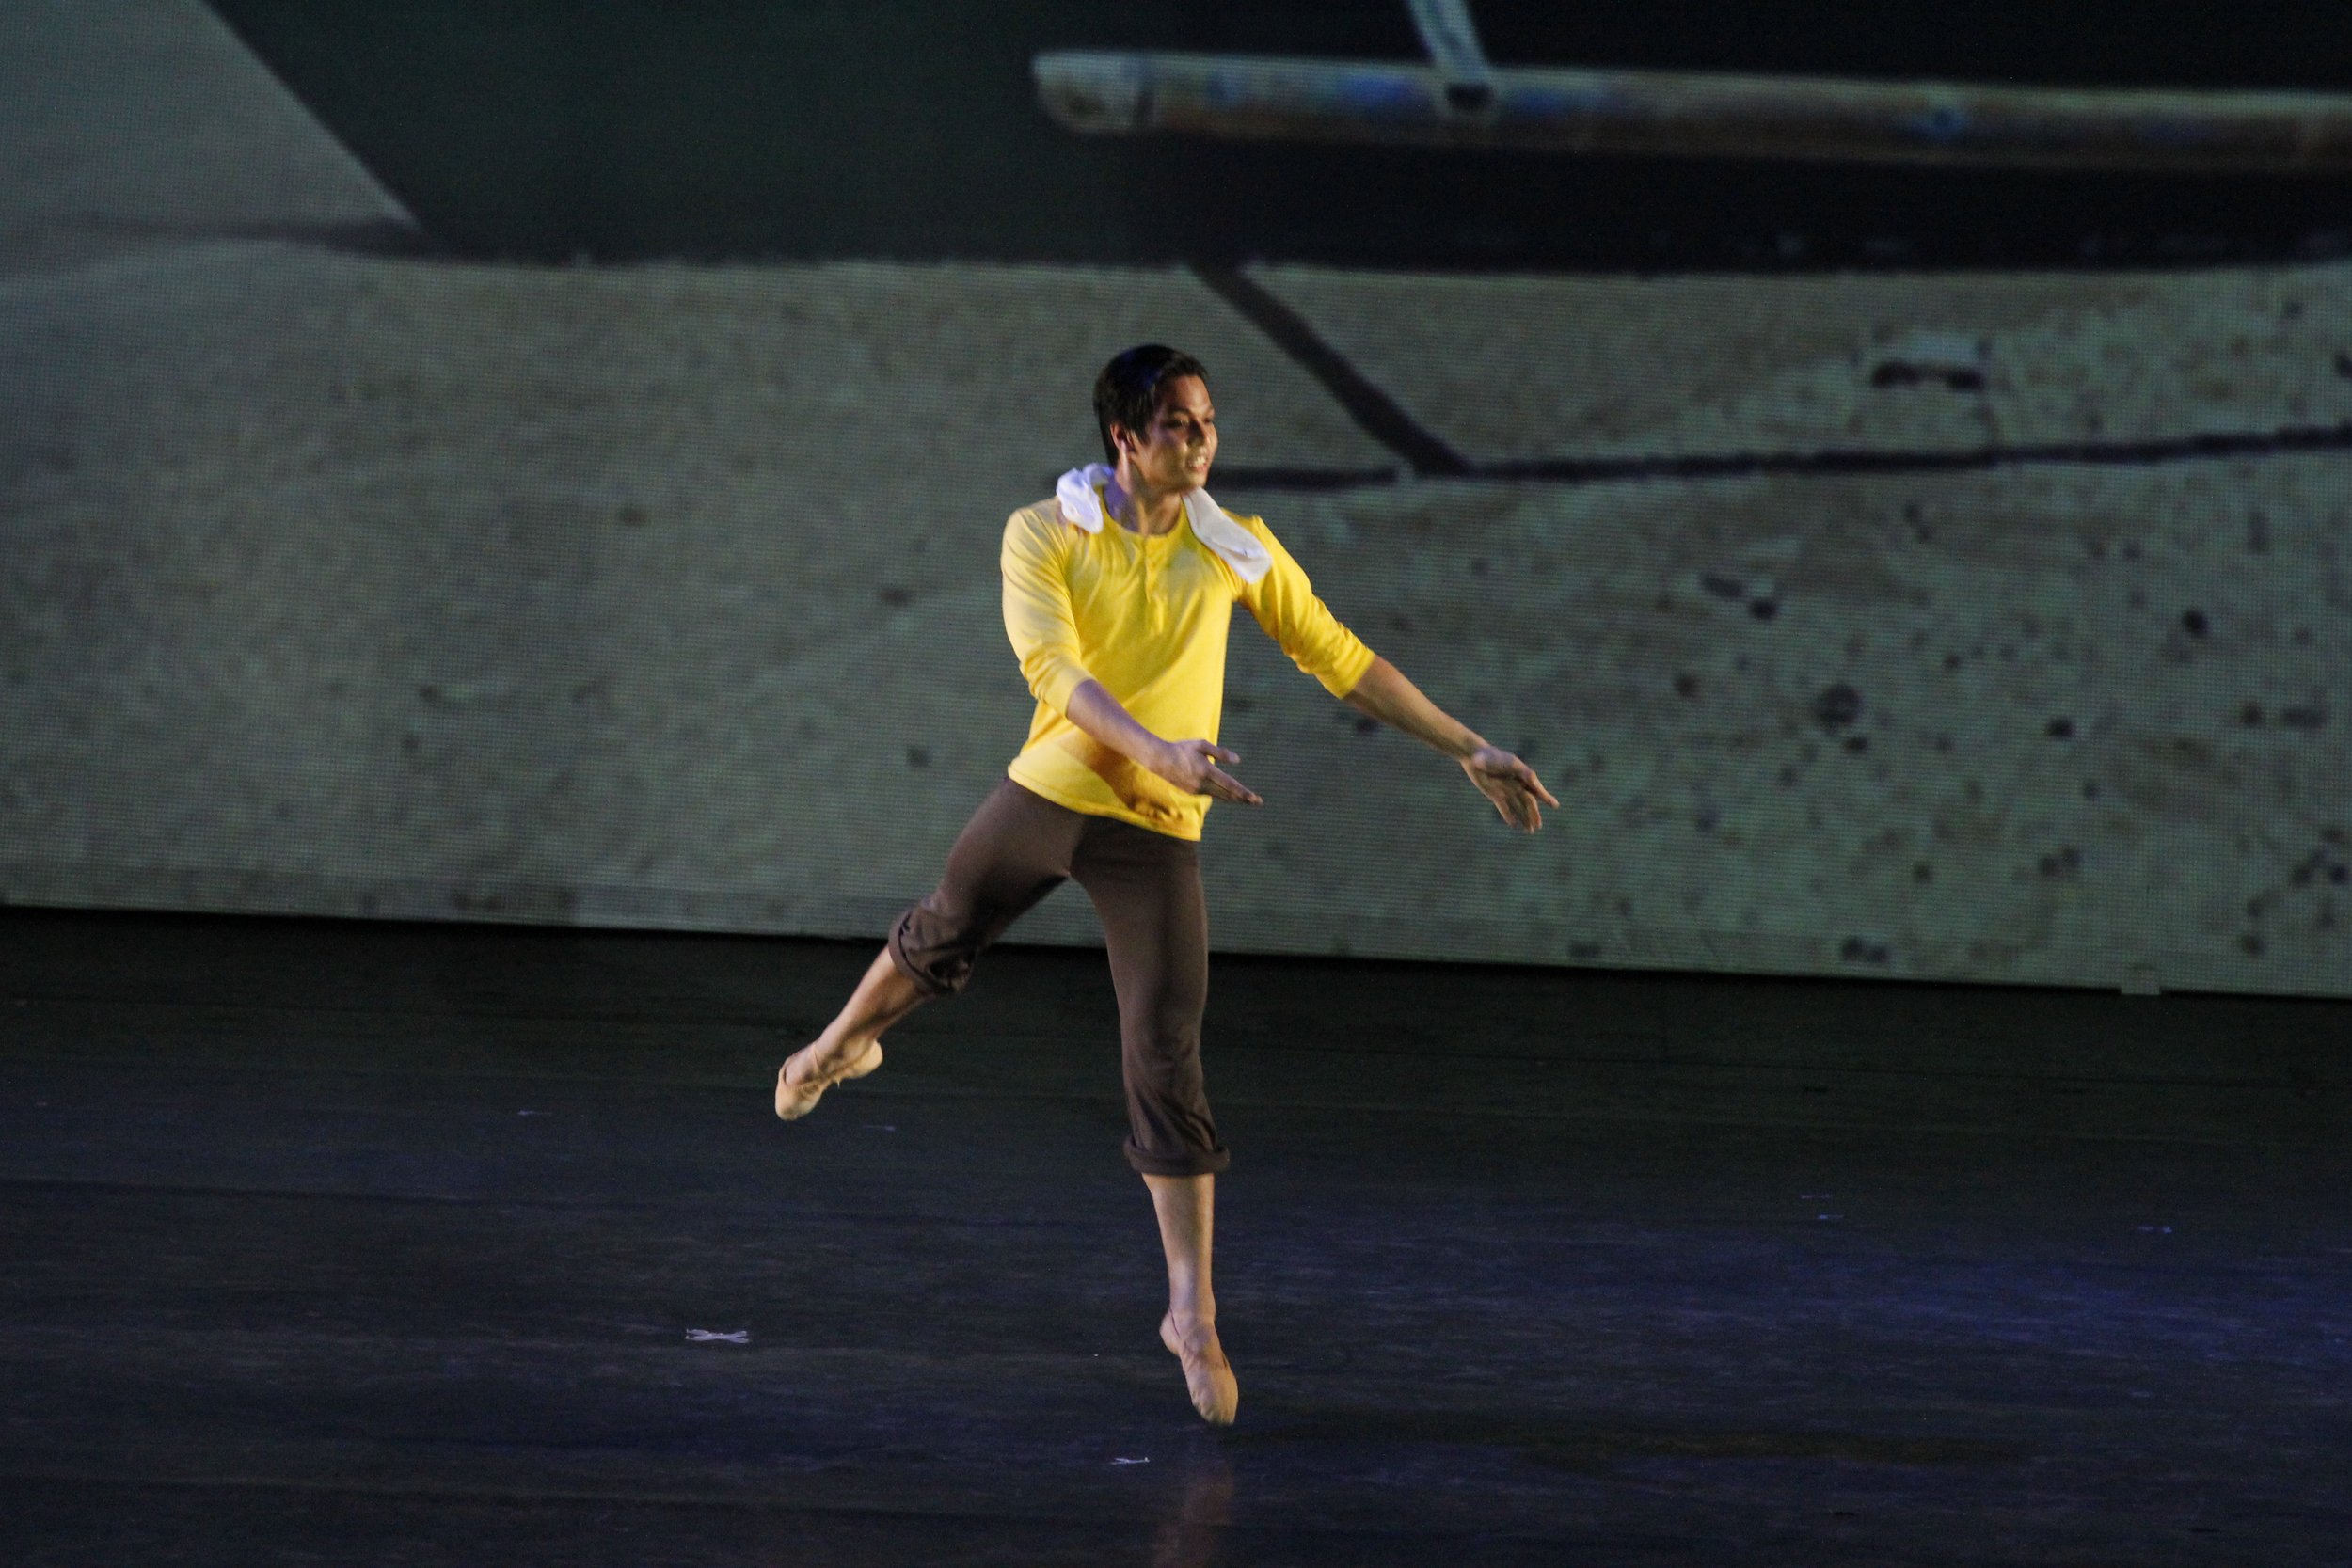    Mark Sumaylo dances in  Kinabuhing Mananagat  by Rudy De Dios, featured in  Kay Ganda ng Ating Musika  (2014). As the lead fisherman, he is aptly attired in yellow as he begins his work at the break of dawn. Photo by Ocs Alvarez   